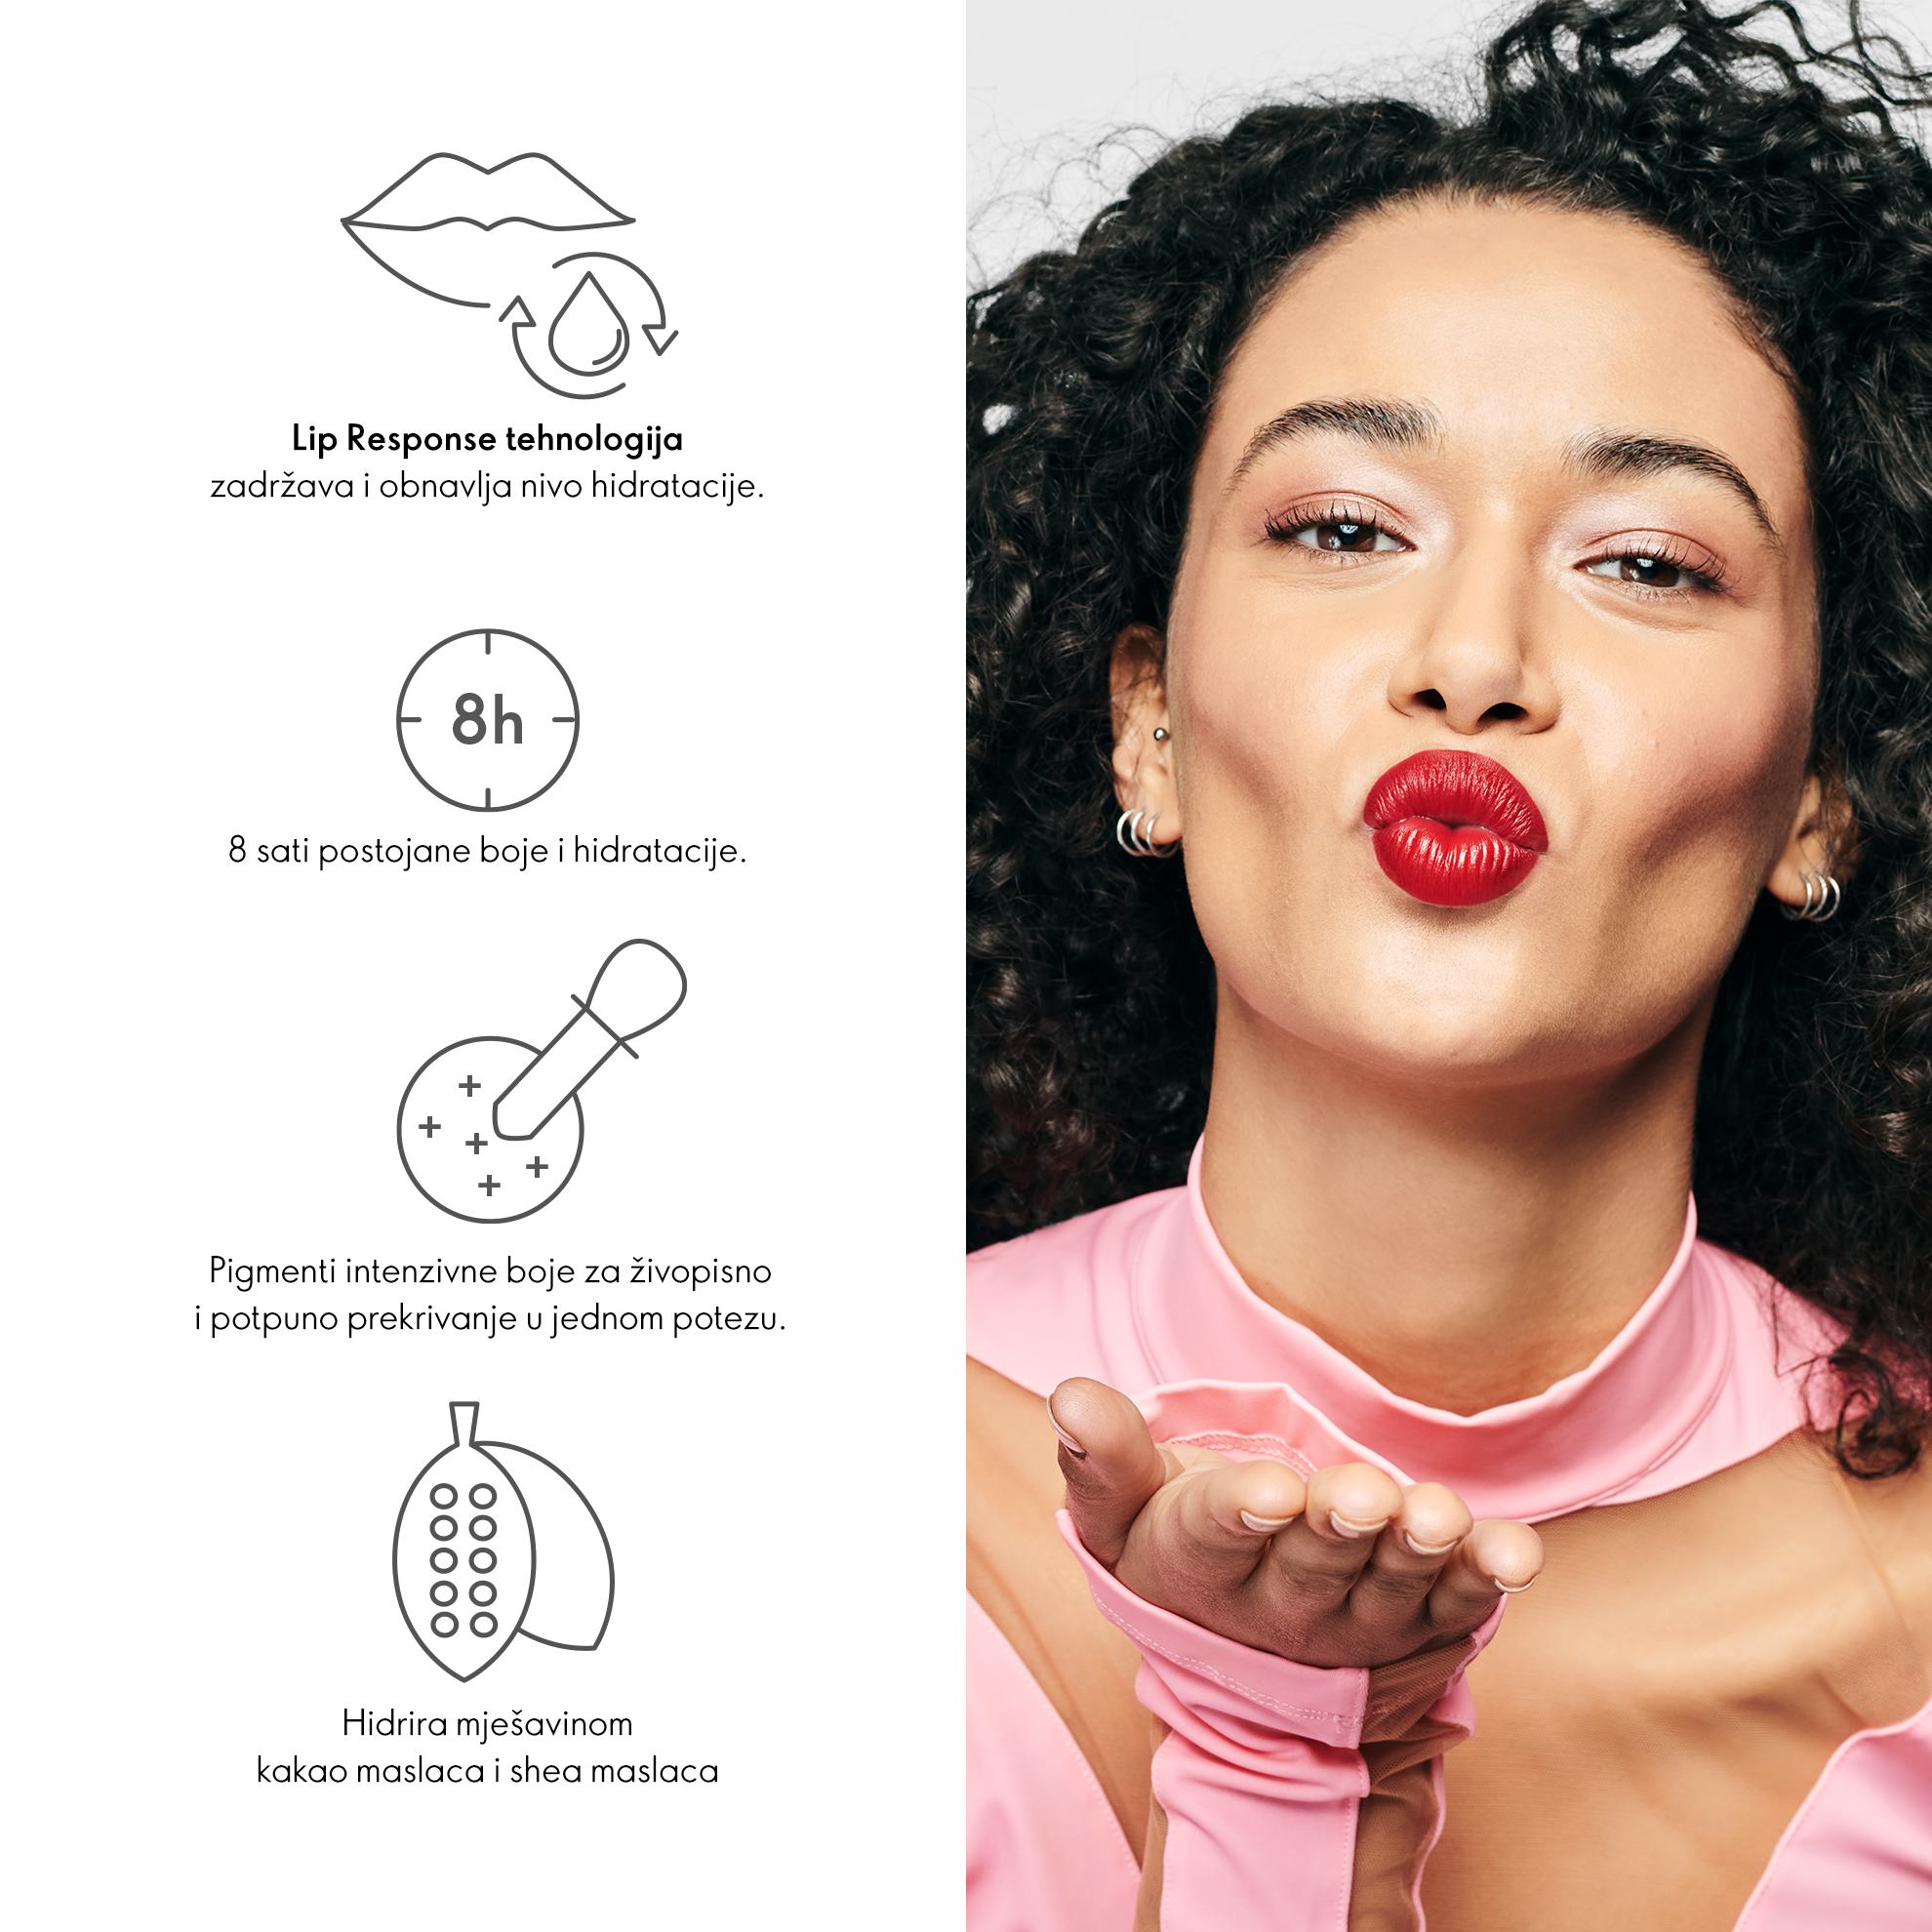 https://media-cdn.oriflame.com/productImage?externalMediaId=product-management-media%2fProducts%2f46440%2fBA%2f46440_2.png&id=18912844&version=3